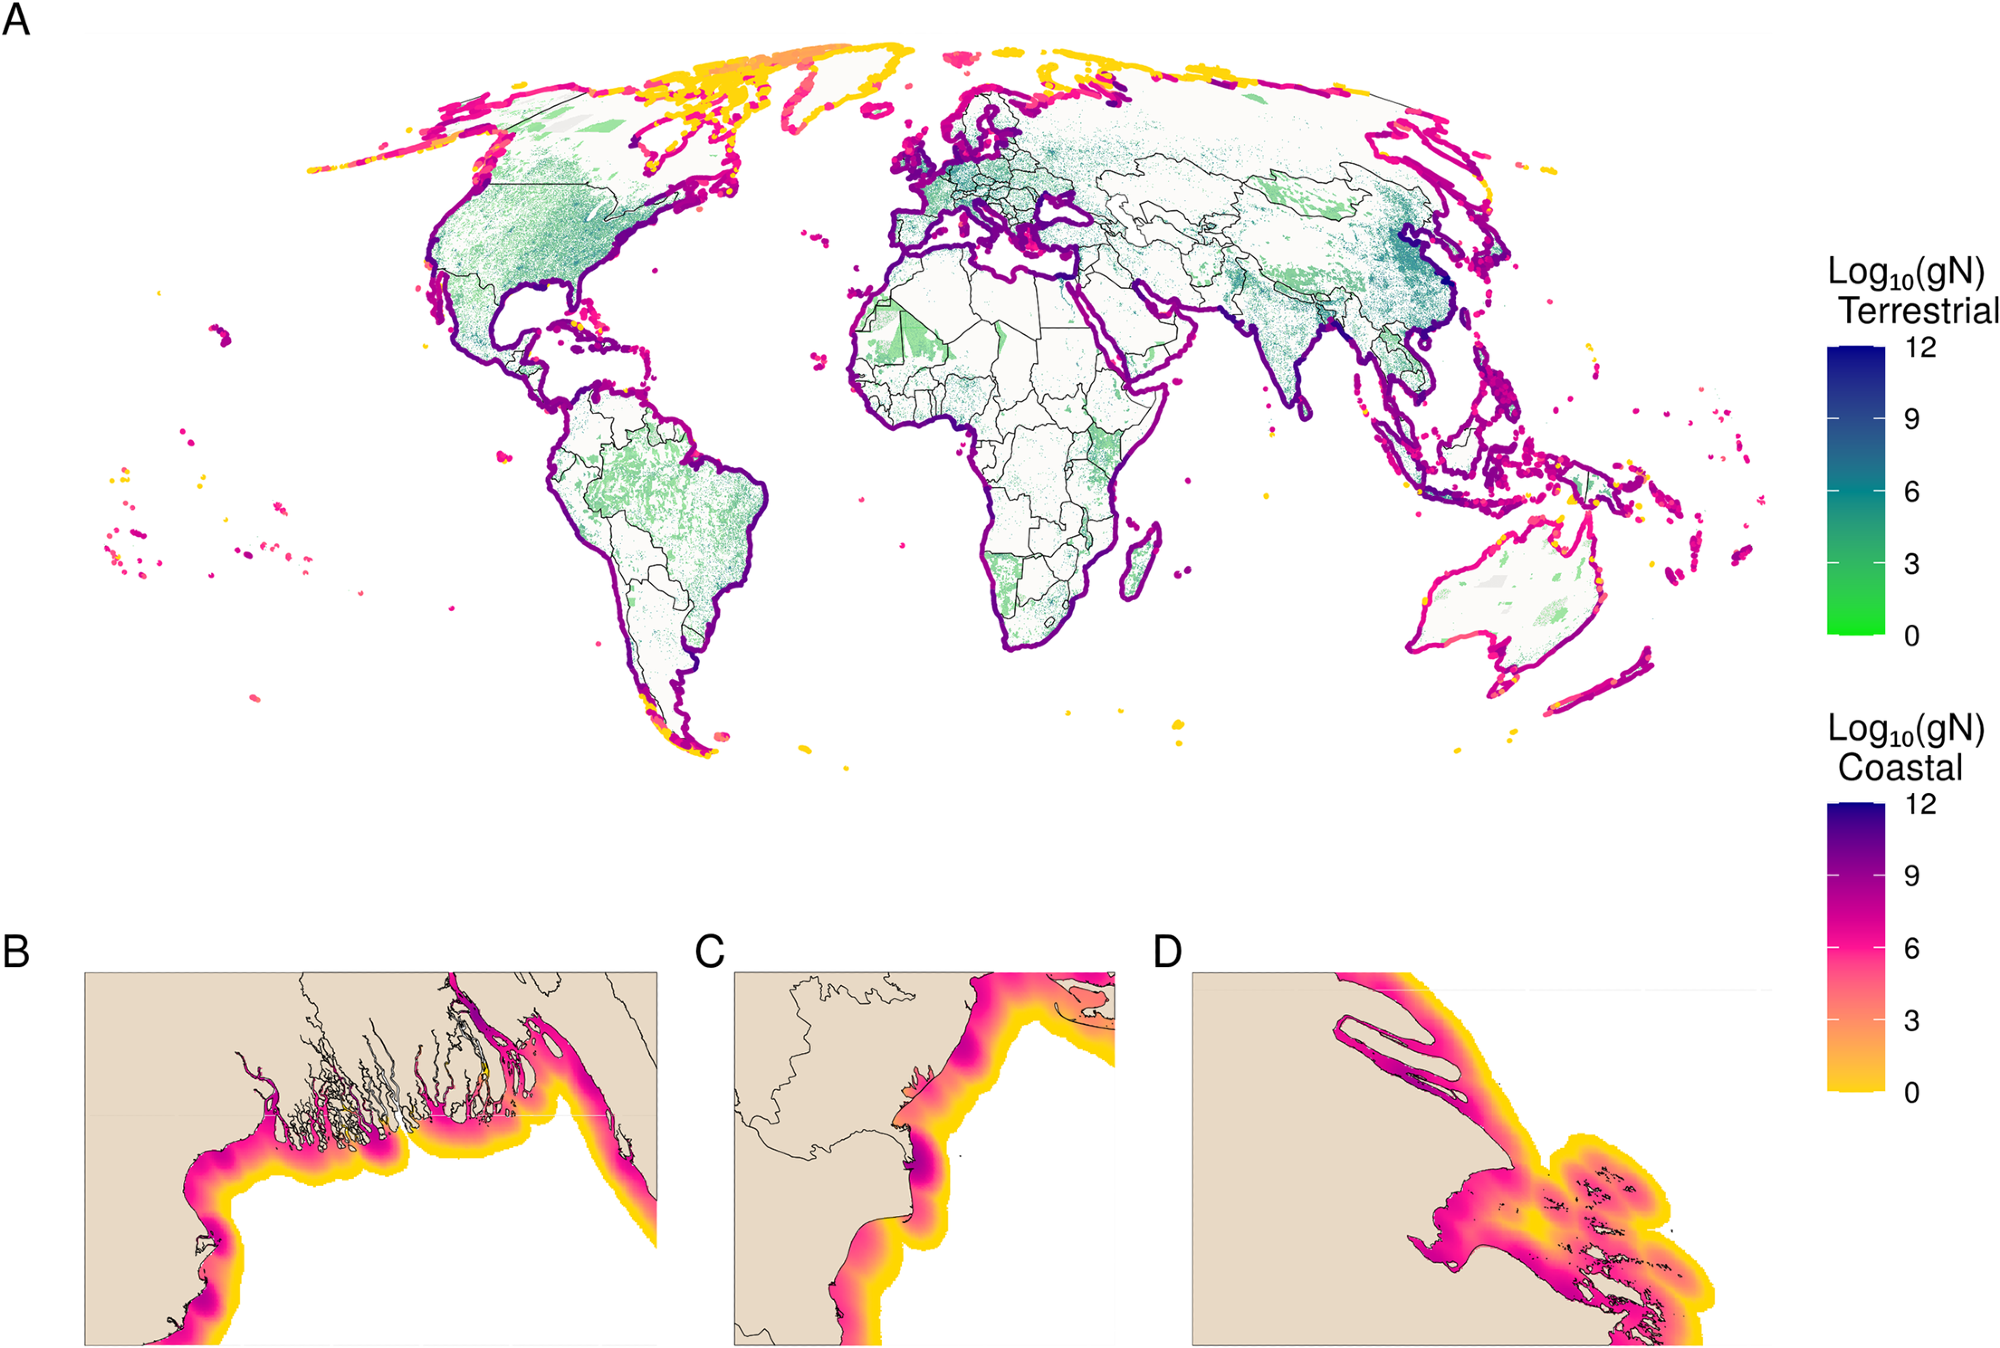 Global distribution of total wastewater N. (A) Global map of the terrestrial sources (green to blue) and coastal diffusion of inputs (yellow to purple) of total wastewater N, measured in log10(gN) in both. Coastal plumes have been buffered to line segments to exaggerate patterns to be visible at the global scale. Insets show zoomed-in views of the (B) Ganges, (C) Danube, and (D) Chang Jiang (Yangtze) Rivers, showing wastewater plumes at high resolution.